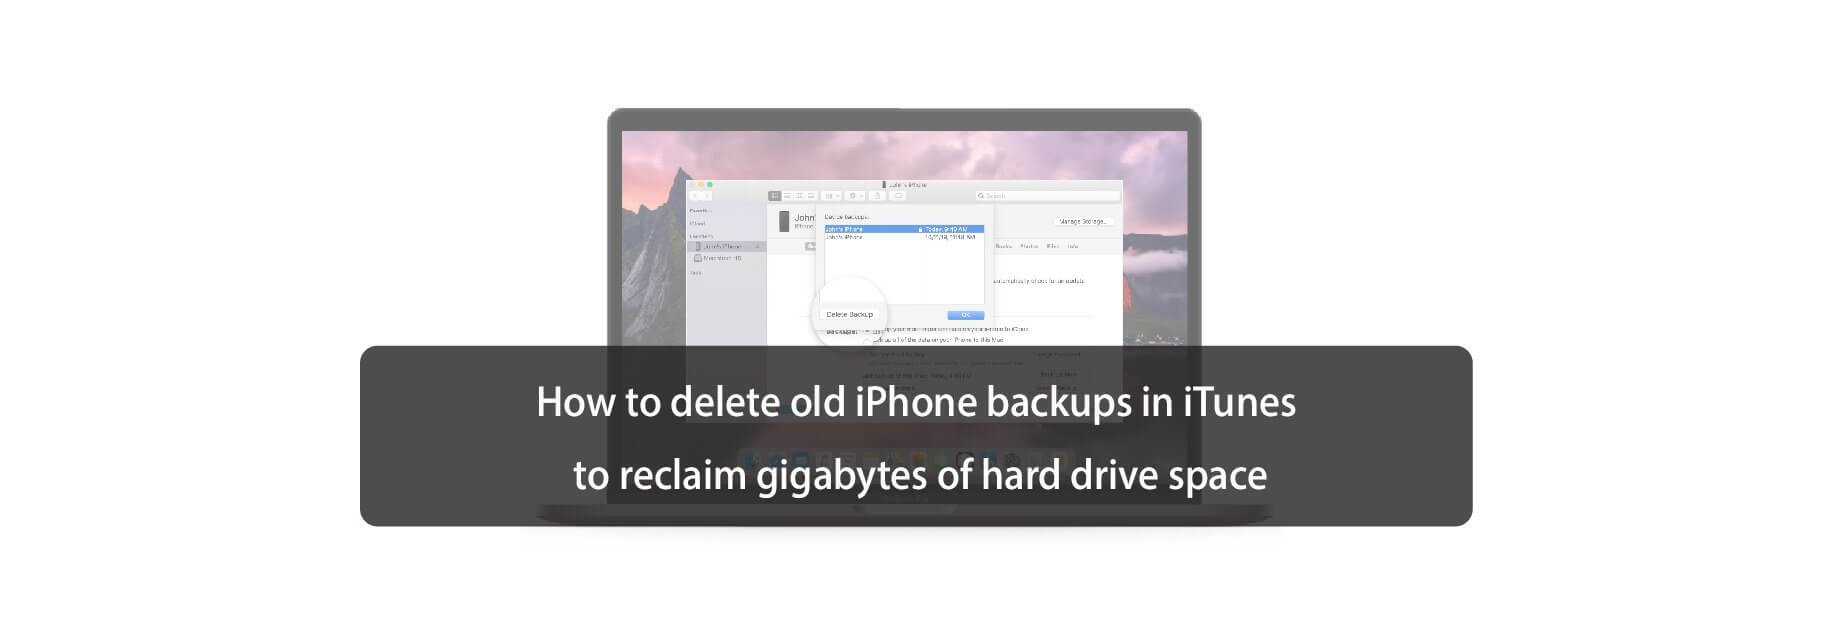 How to delete old iPhone backups in iTunes to reclaim gigabytes of hard drive space